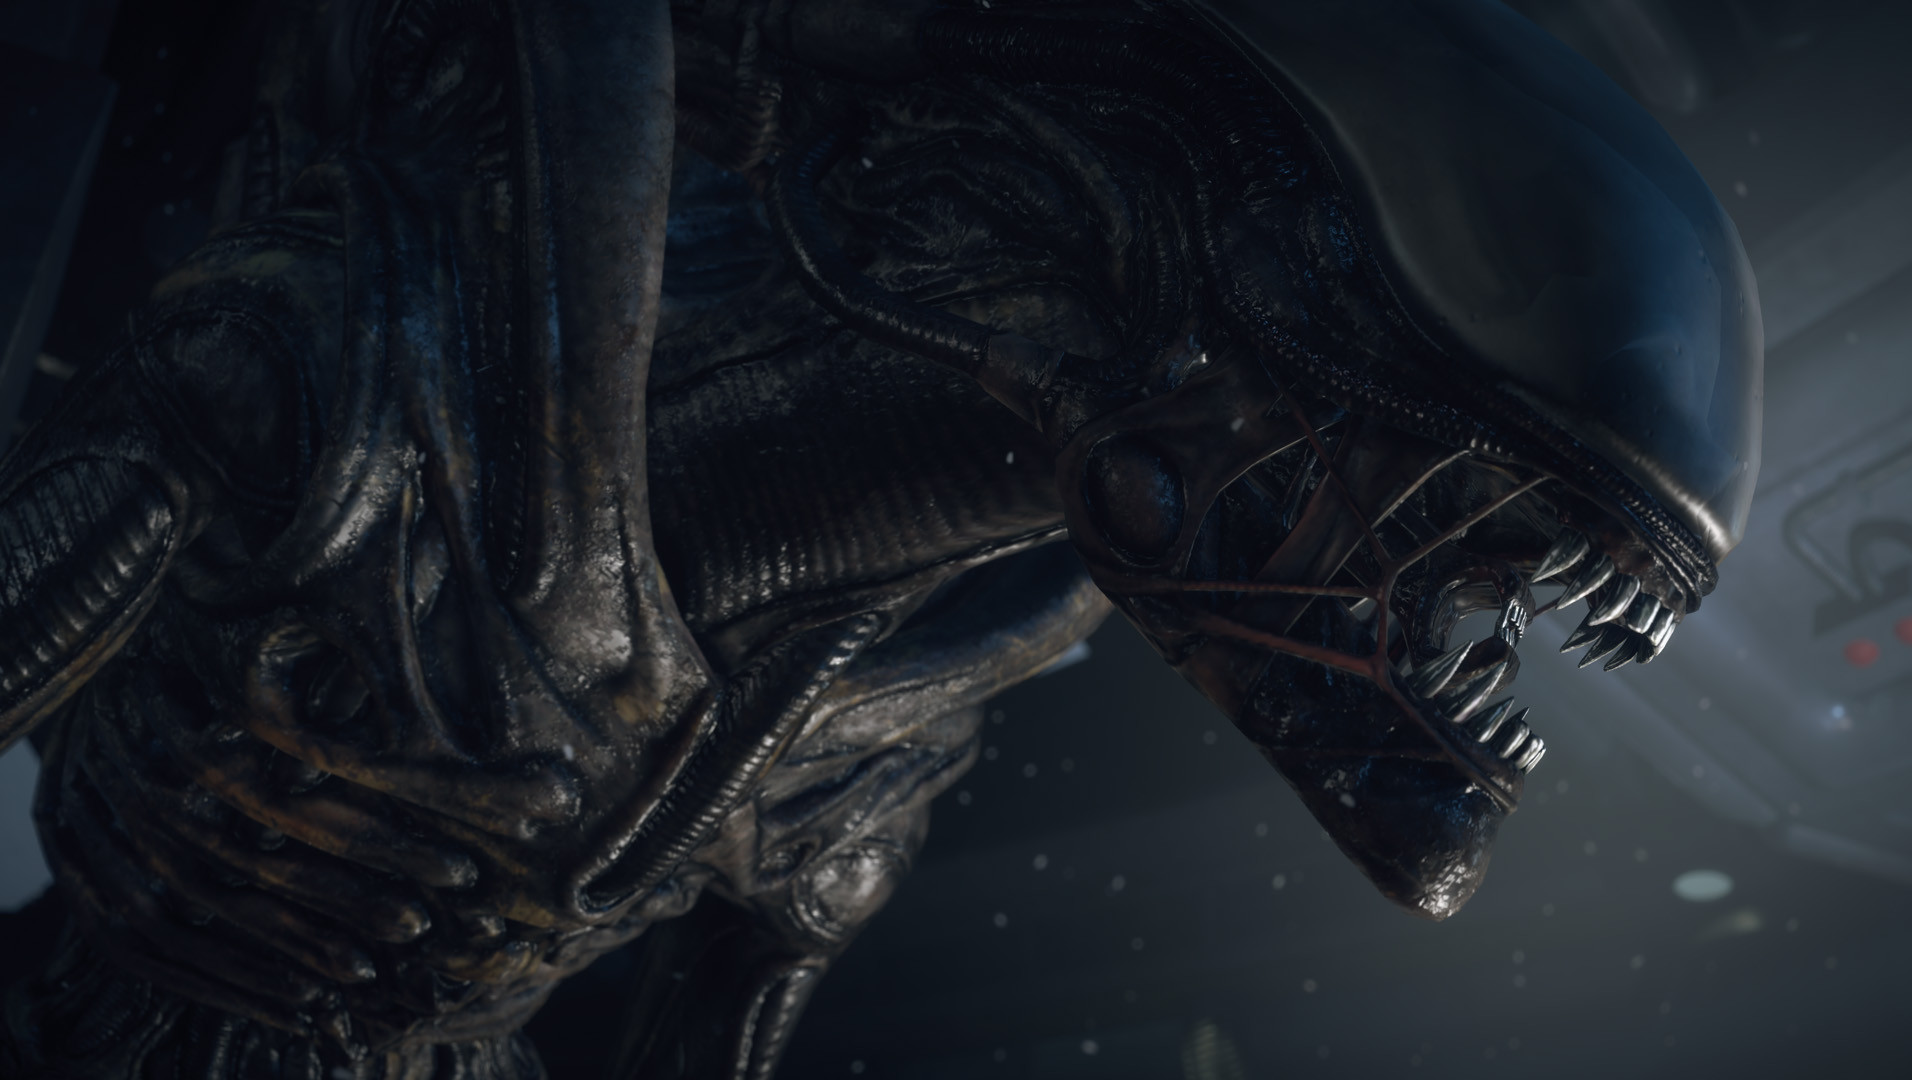 A Neill Blomkamp Directed Alien Movie is in the Works